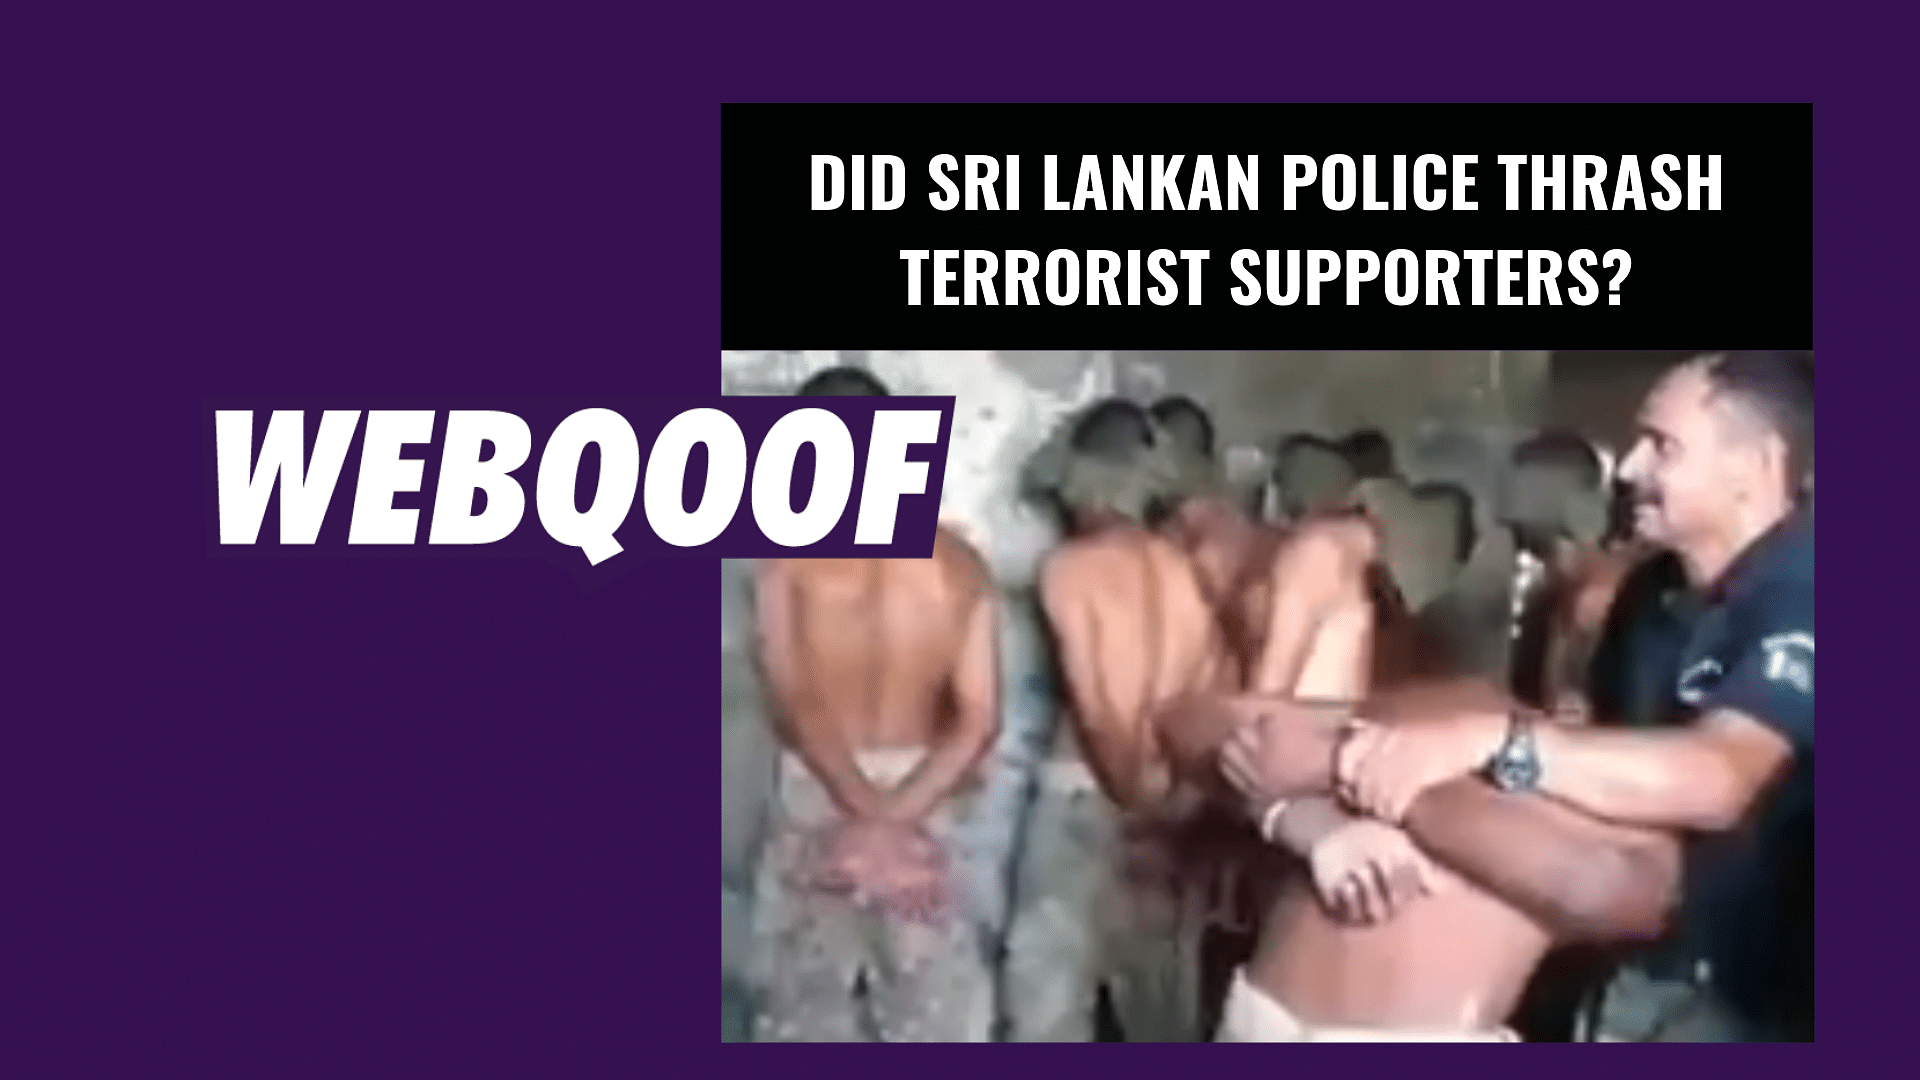 A viral video falsely claims that the Sri Lankan Police tortured terrorist supporters.